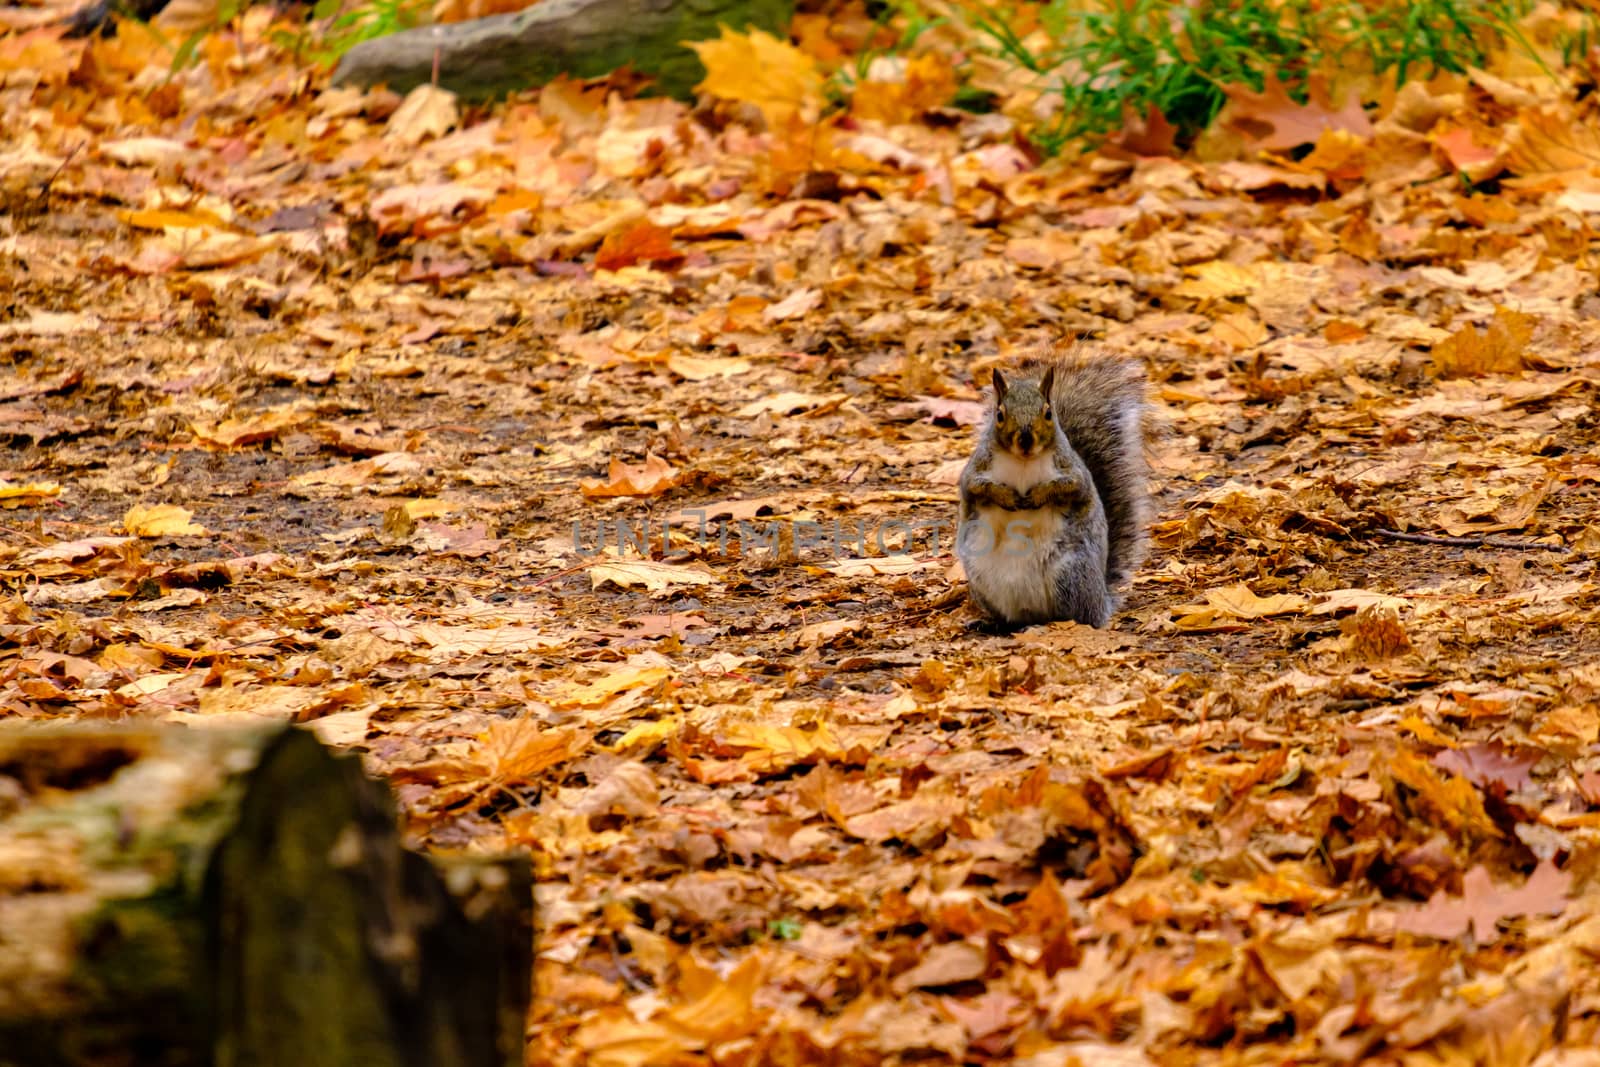 An eastern grey squirrel (Sciurus carolinensis) sits upright in the woods among fallen autumn leaves in the fall season.